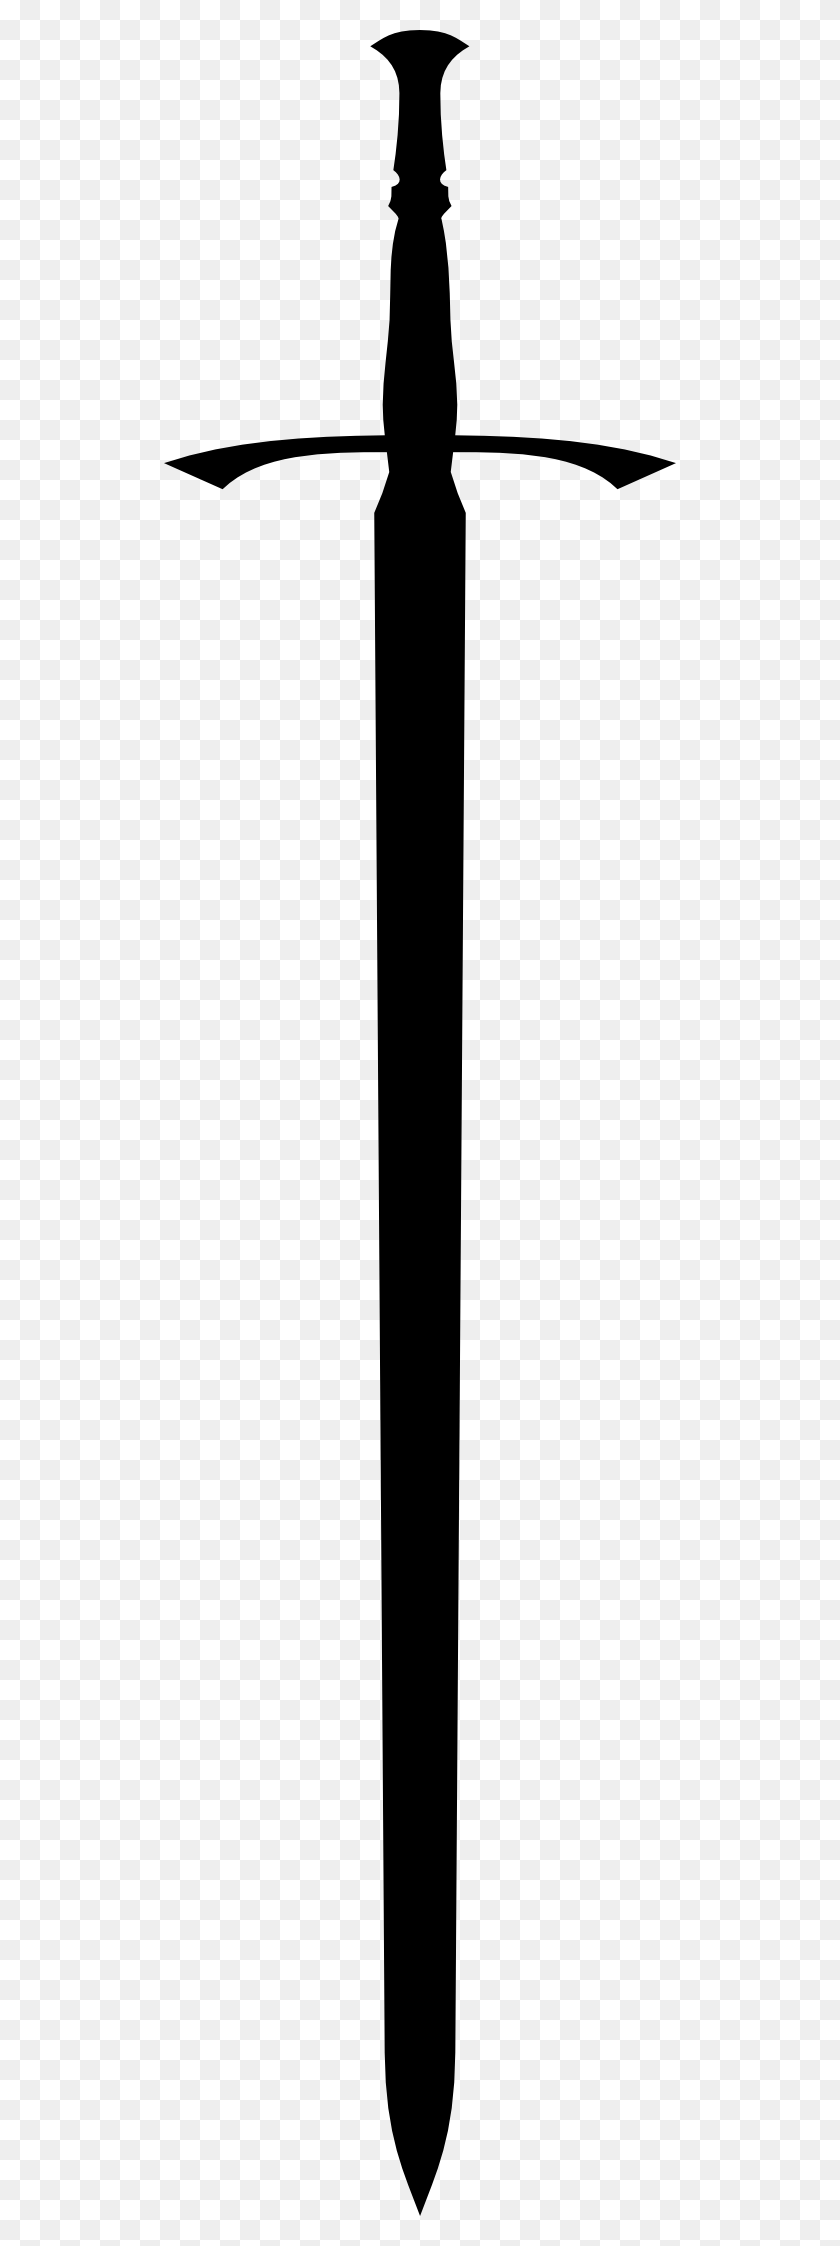 Sword Png Black And White Transparent Sword Black And White Sword Vector Png Stunning Free Transparent Png Clipart Images Free Download